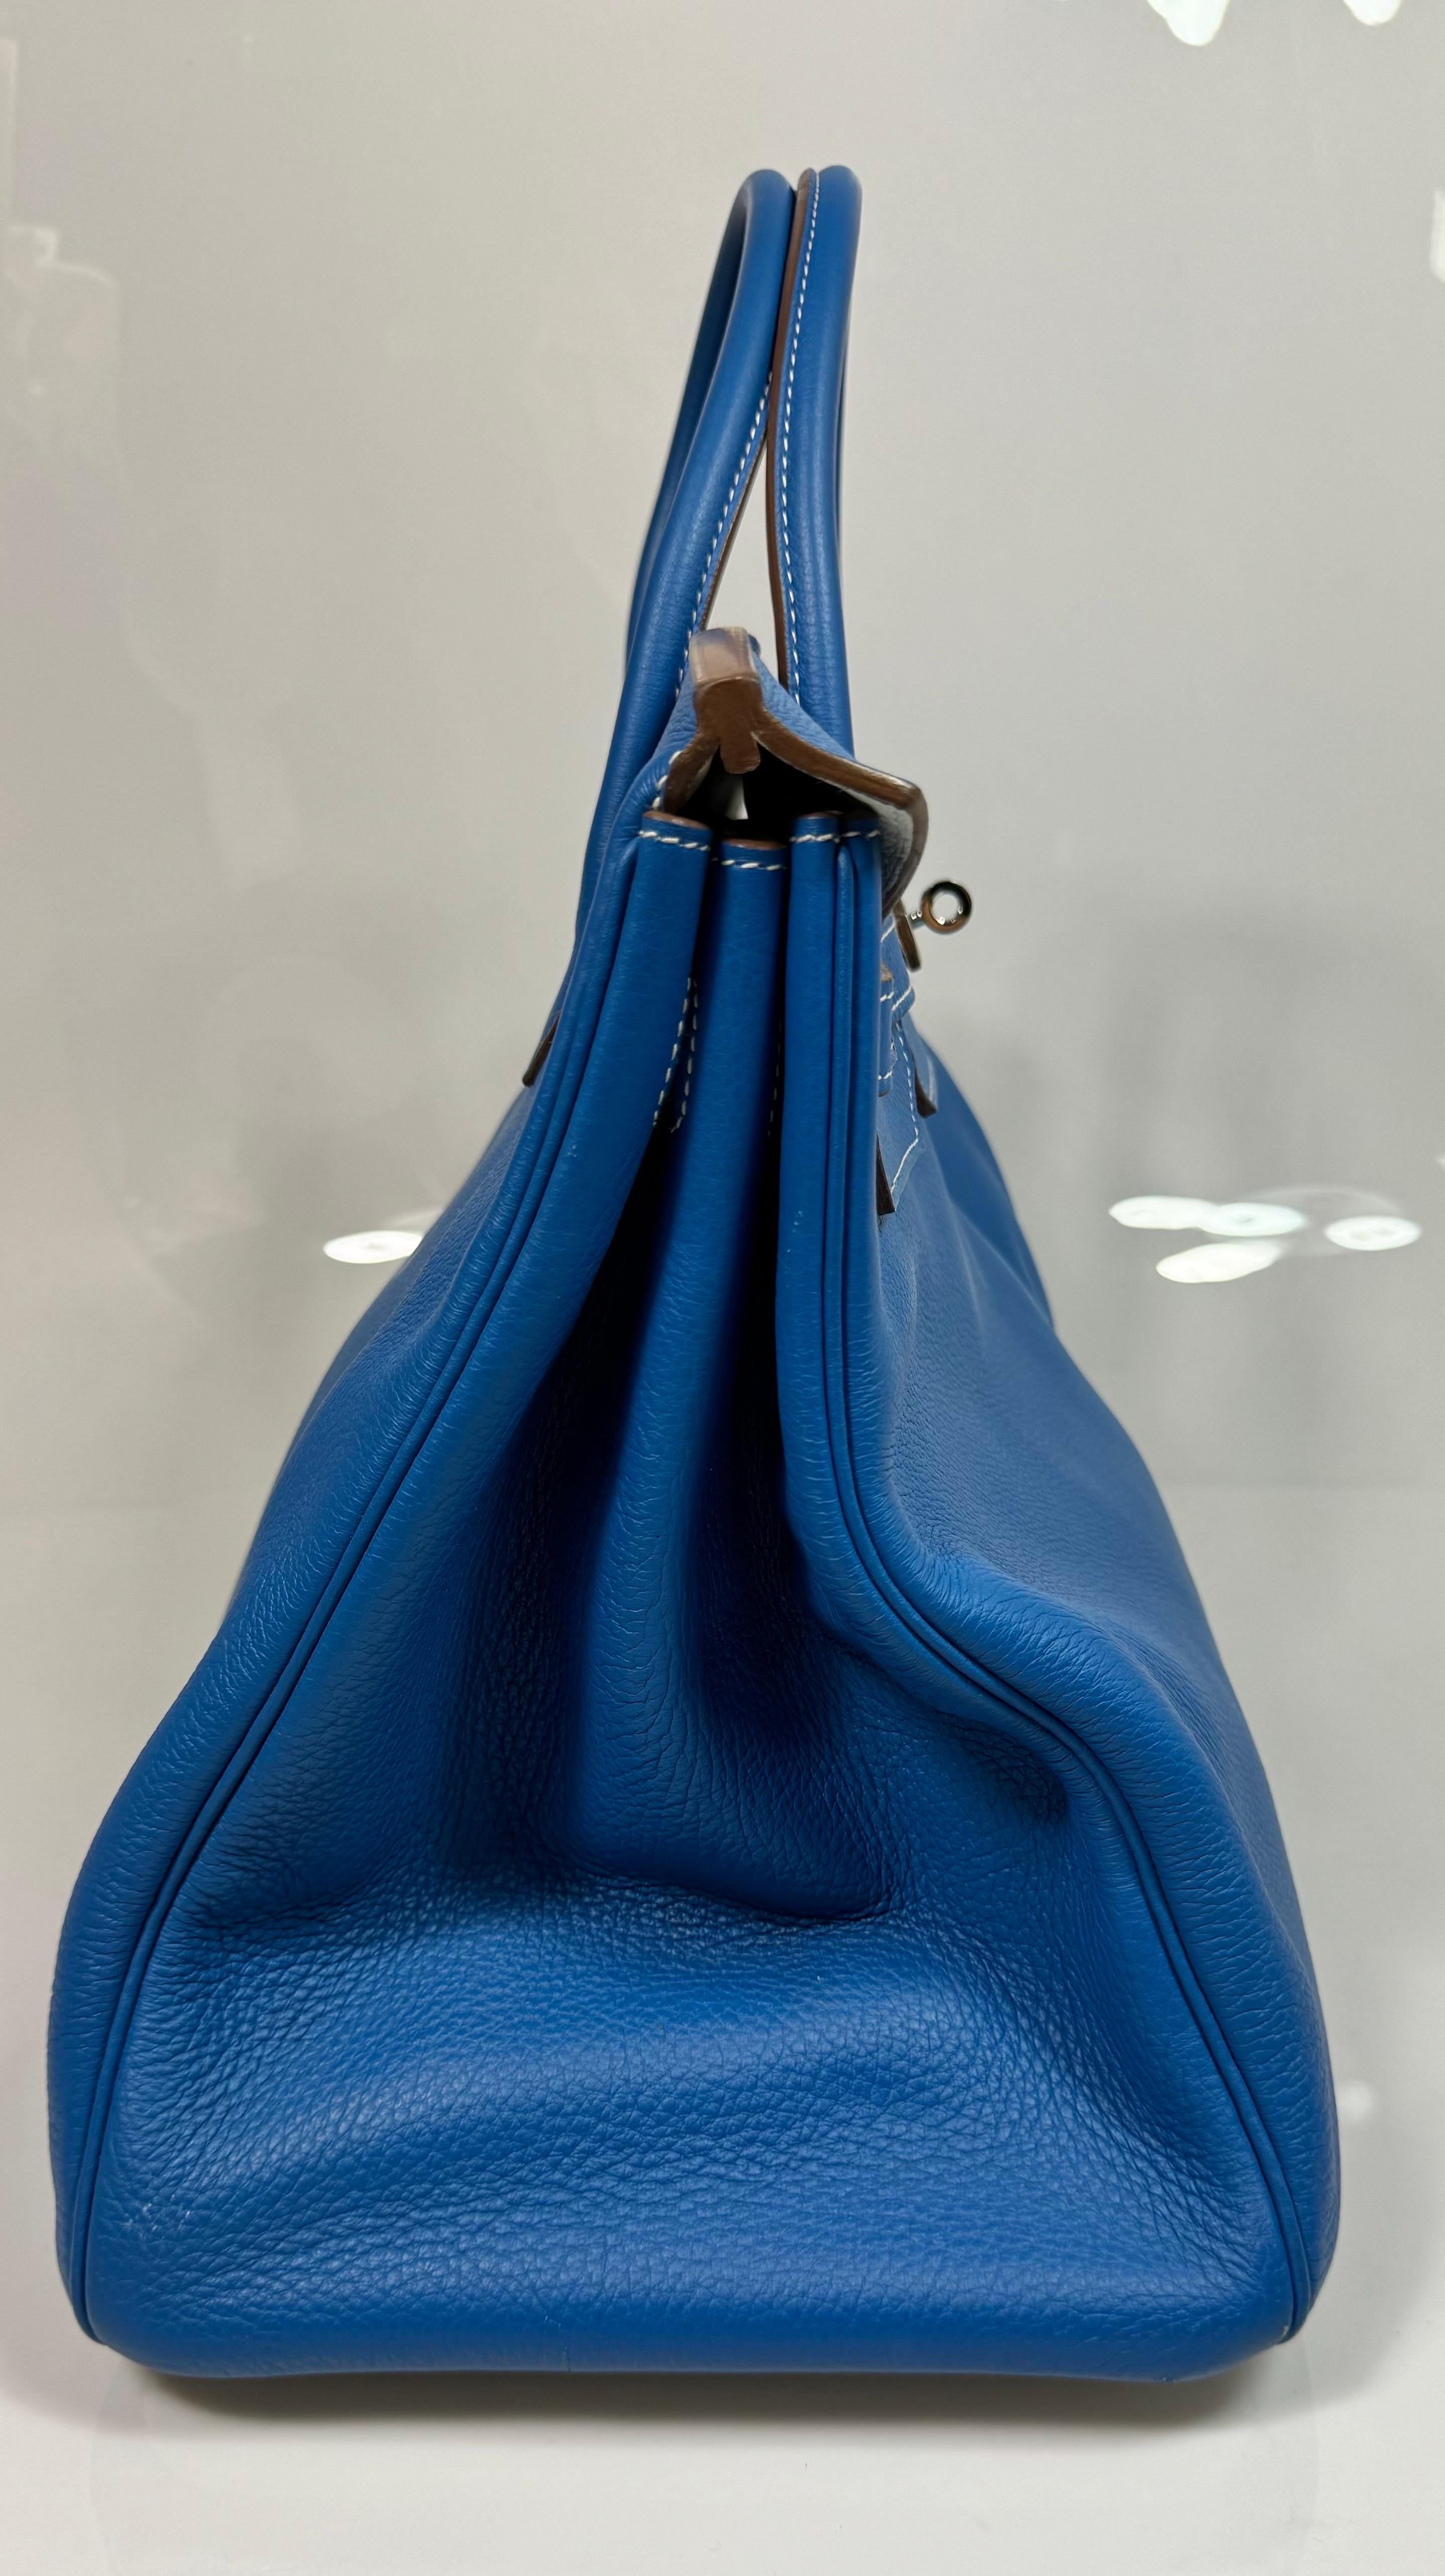 This is an authentic limited edition HERMES 40cm Clemence Leather Mykonos Blue and White Birkin with Silver Hardware is from 2011 with an O inside a square. This bi-color limited edition Birkin handbag is hard to find and a perfect addition to any